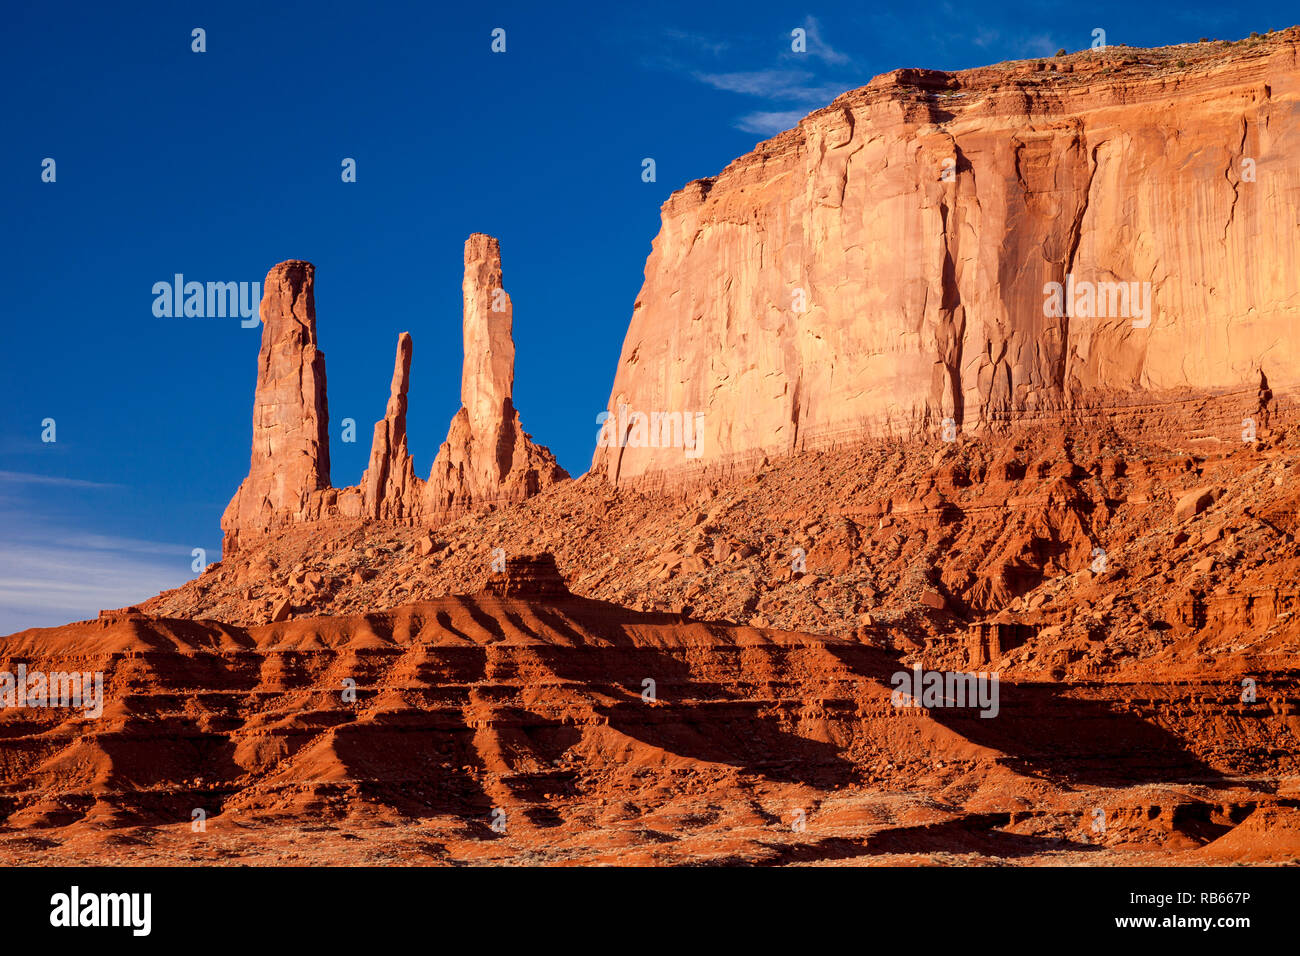 Early morning view over the Three Sisters rock formation, Monument Valley, Navaho Tribal Park, Arizona USA Stock Photo